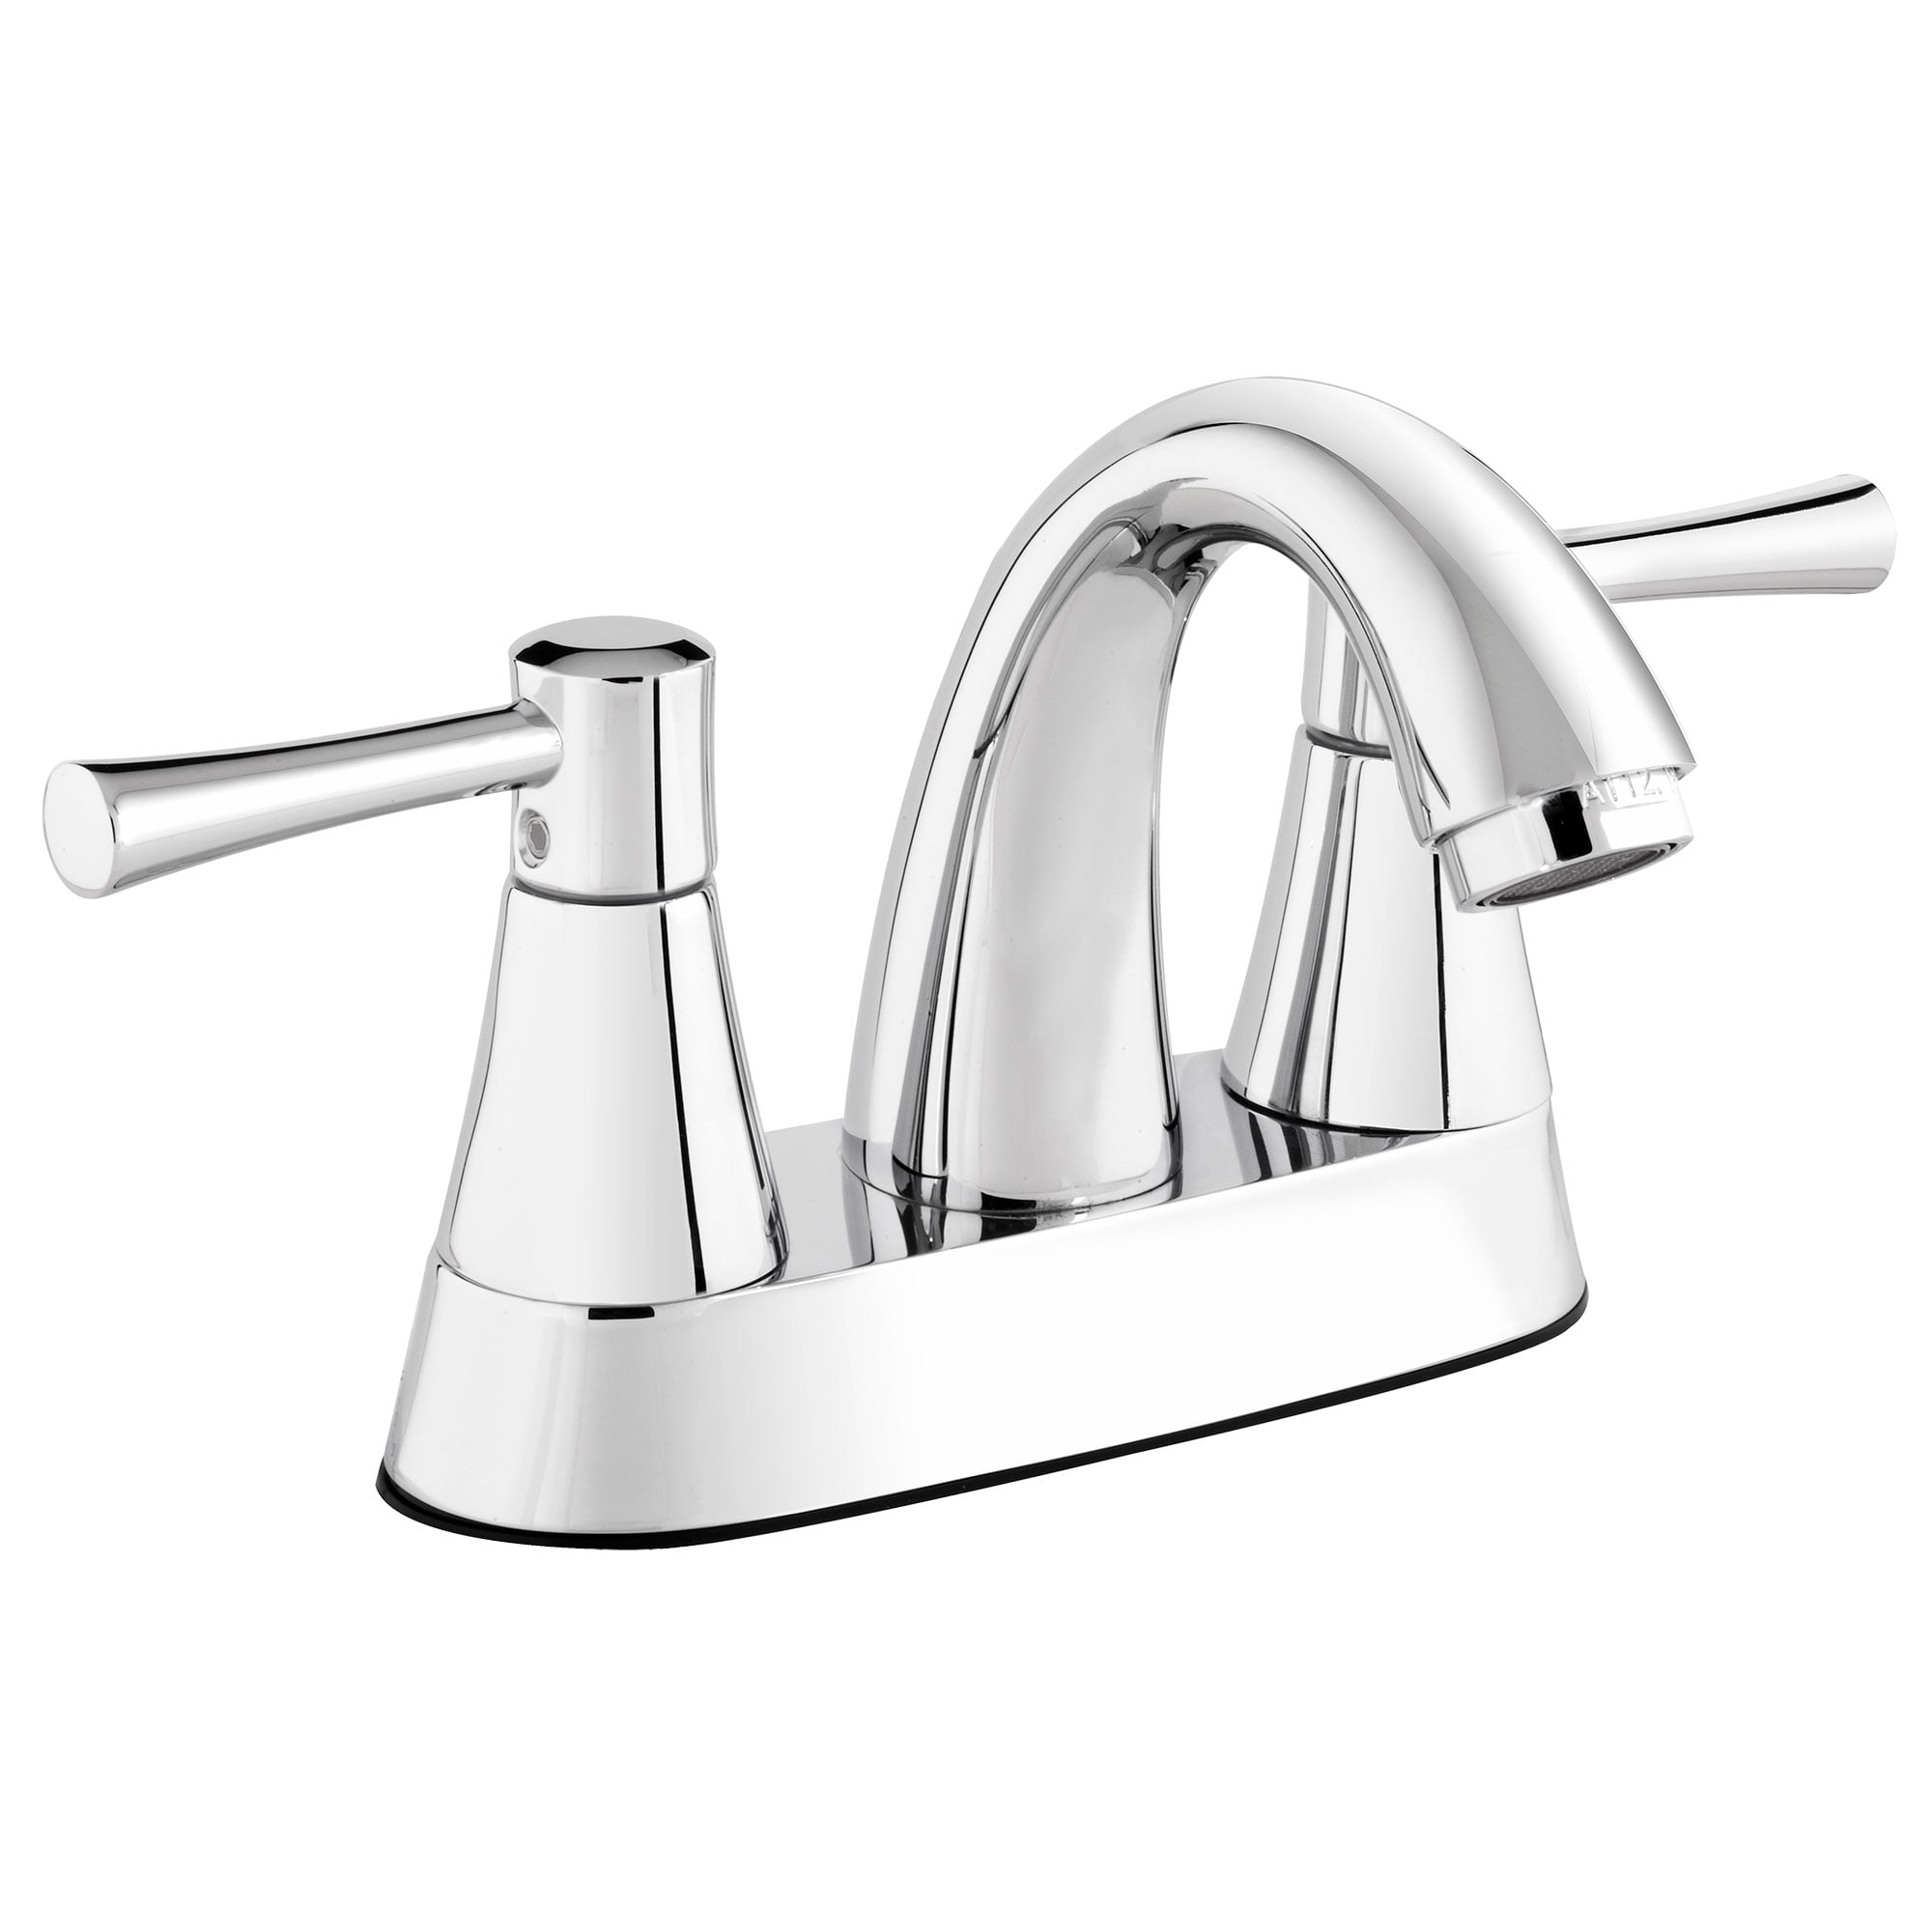 Polished Chrome Belanger NEO79CCP Bathroom Sink Faucet with 2-Handles and Widespread